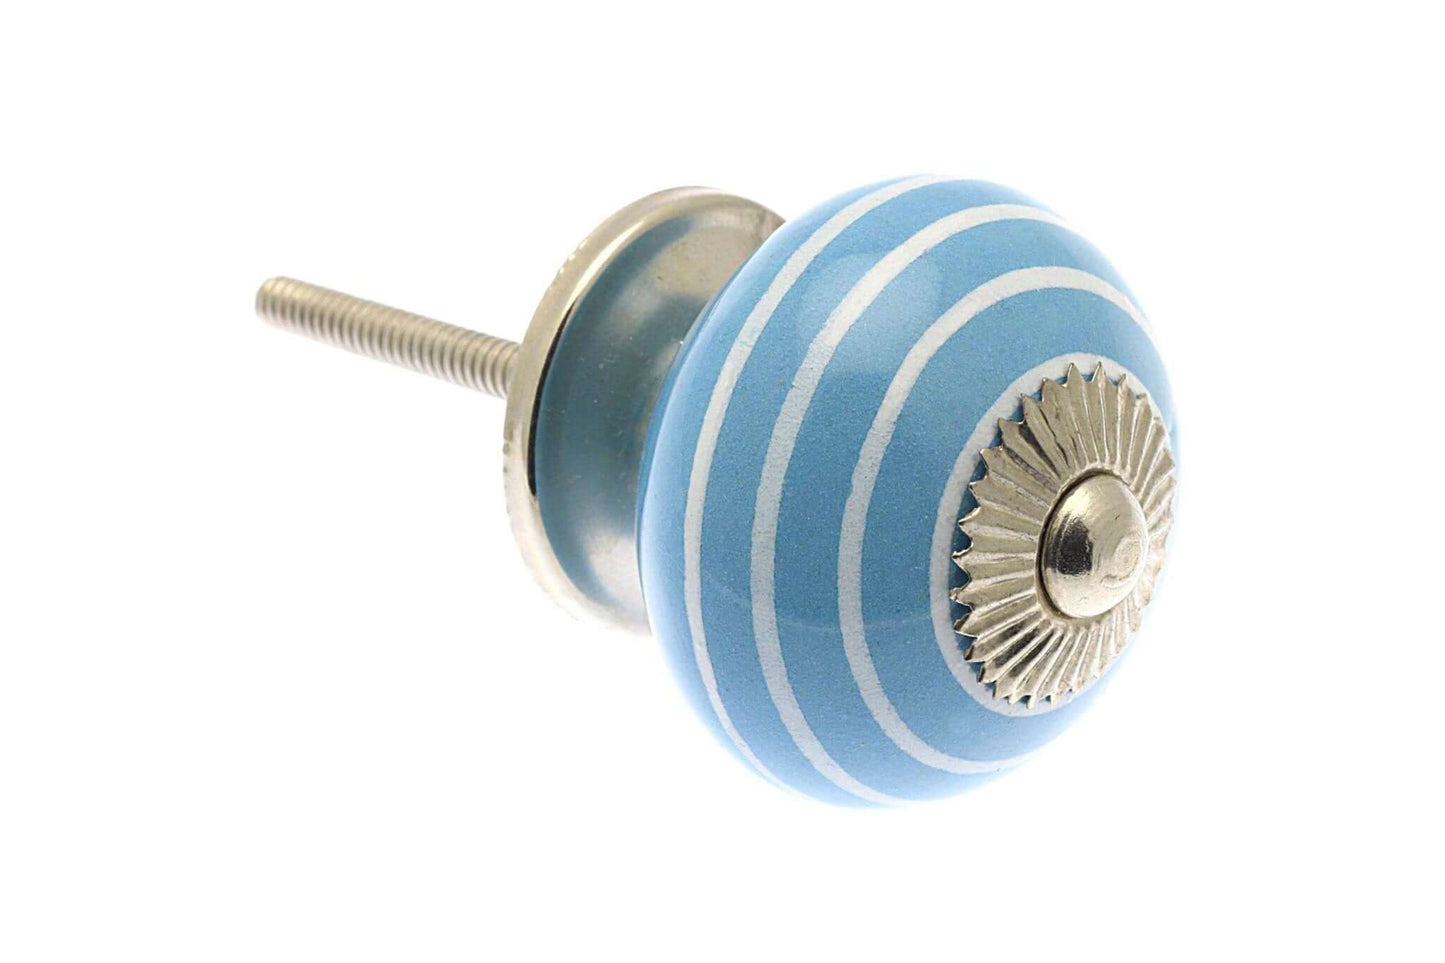 Ceramic Cupboard Knobs - Round Ceramic Knob Blue With White Stripes / Hoops 40mm (MT-026)